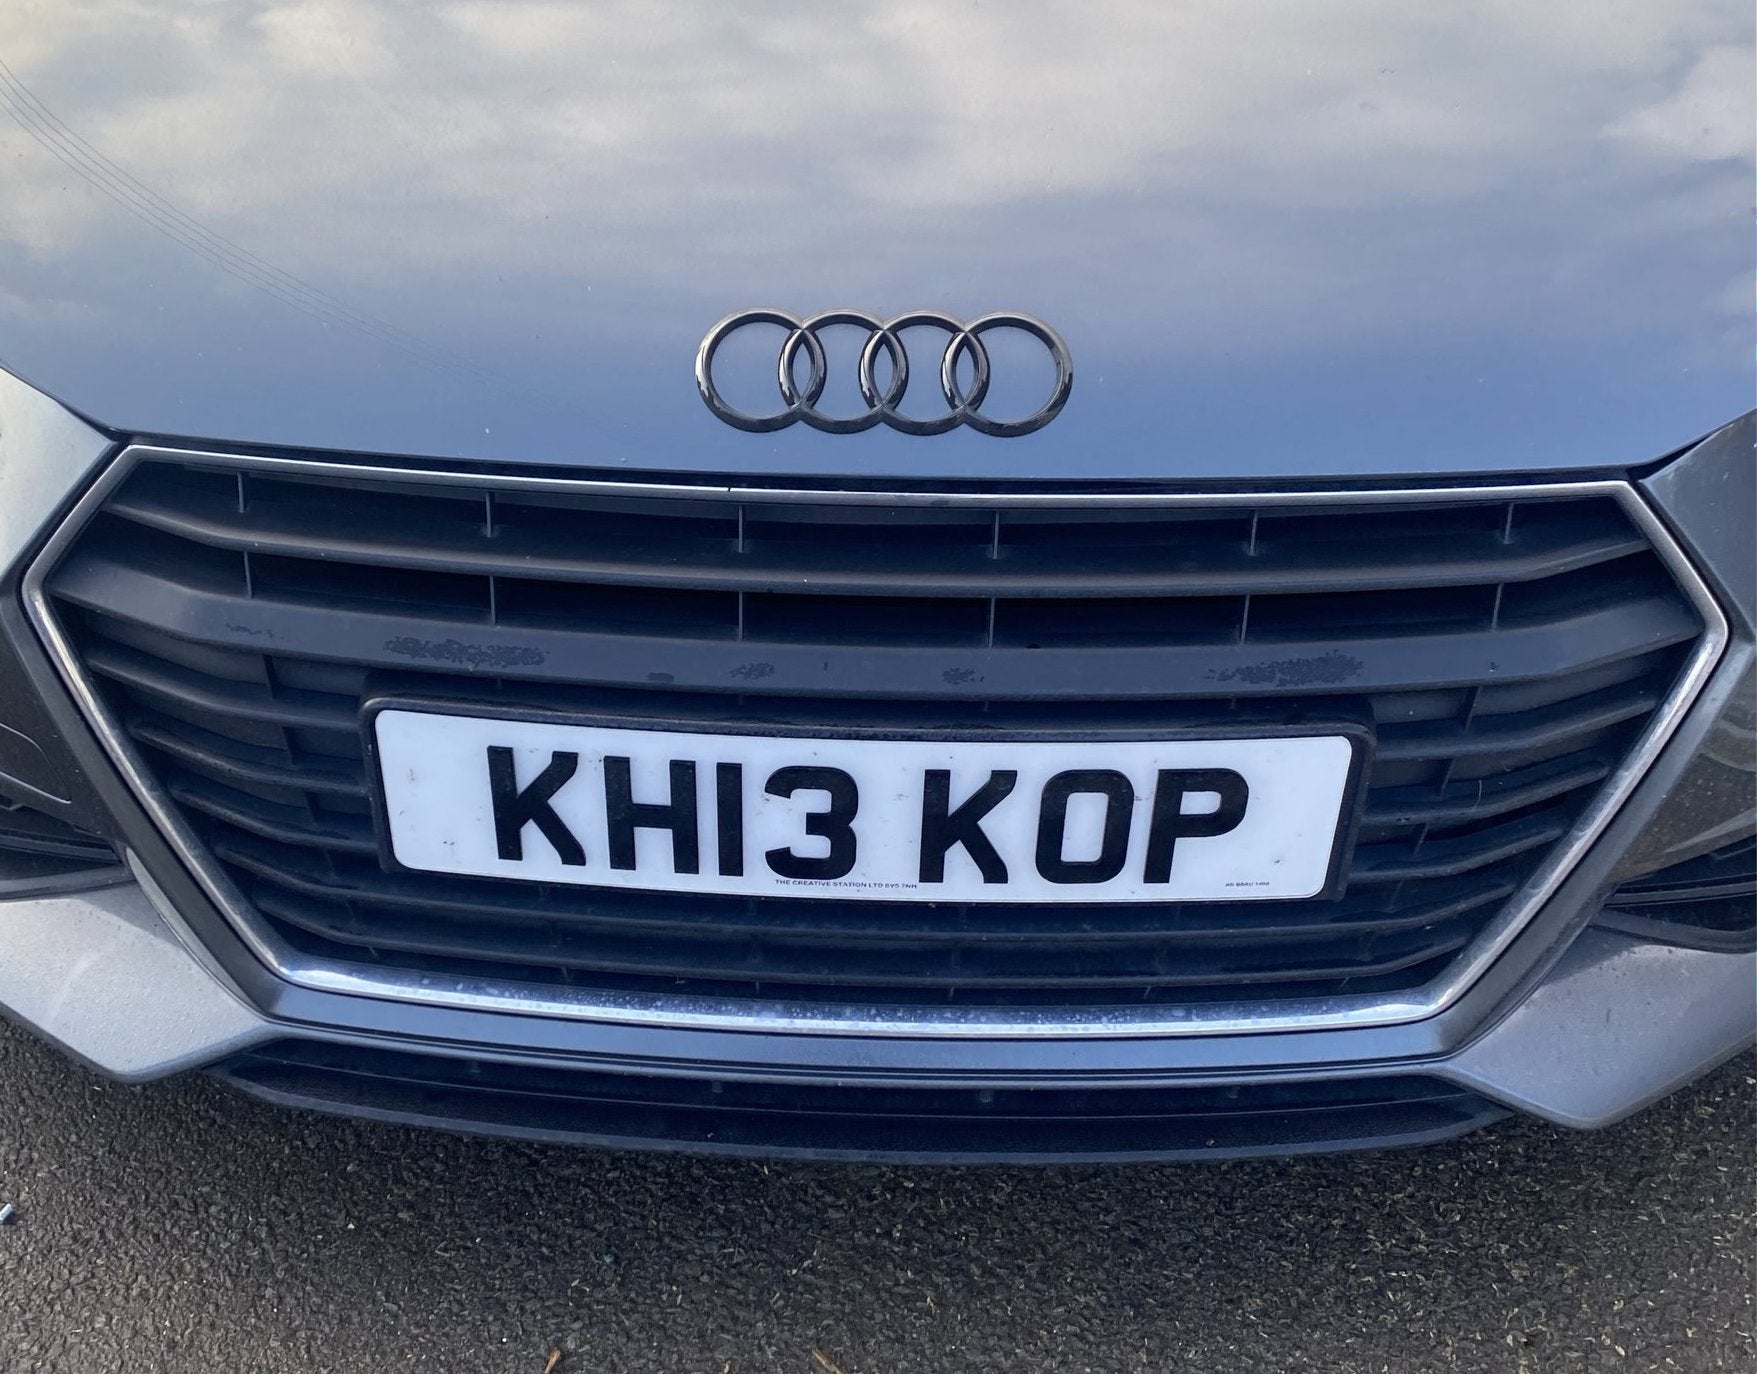 4D licence plate